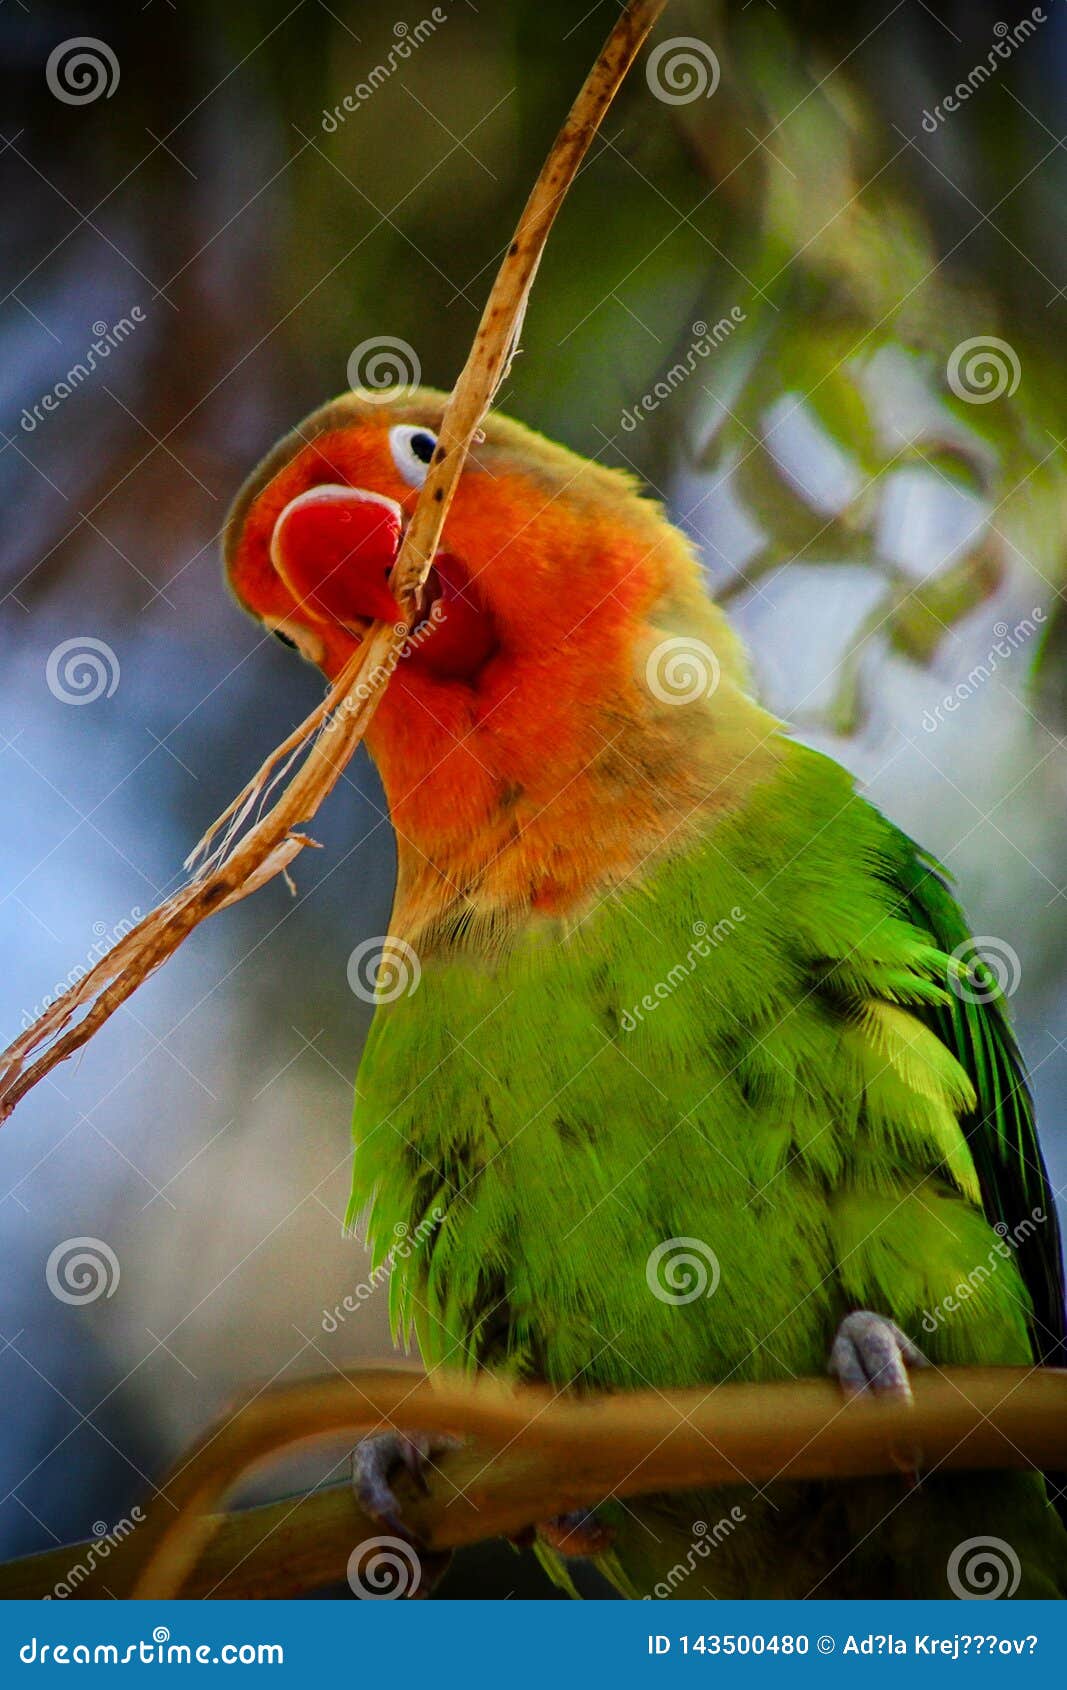 Cute Parrot Agapornis Fisher Holding a Twing in Beak Stock Photo ...